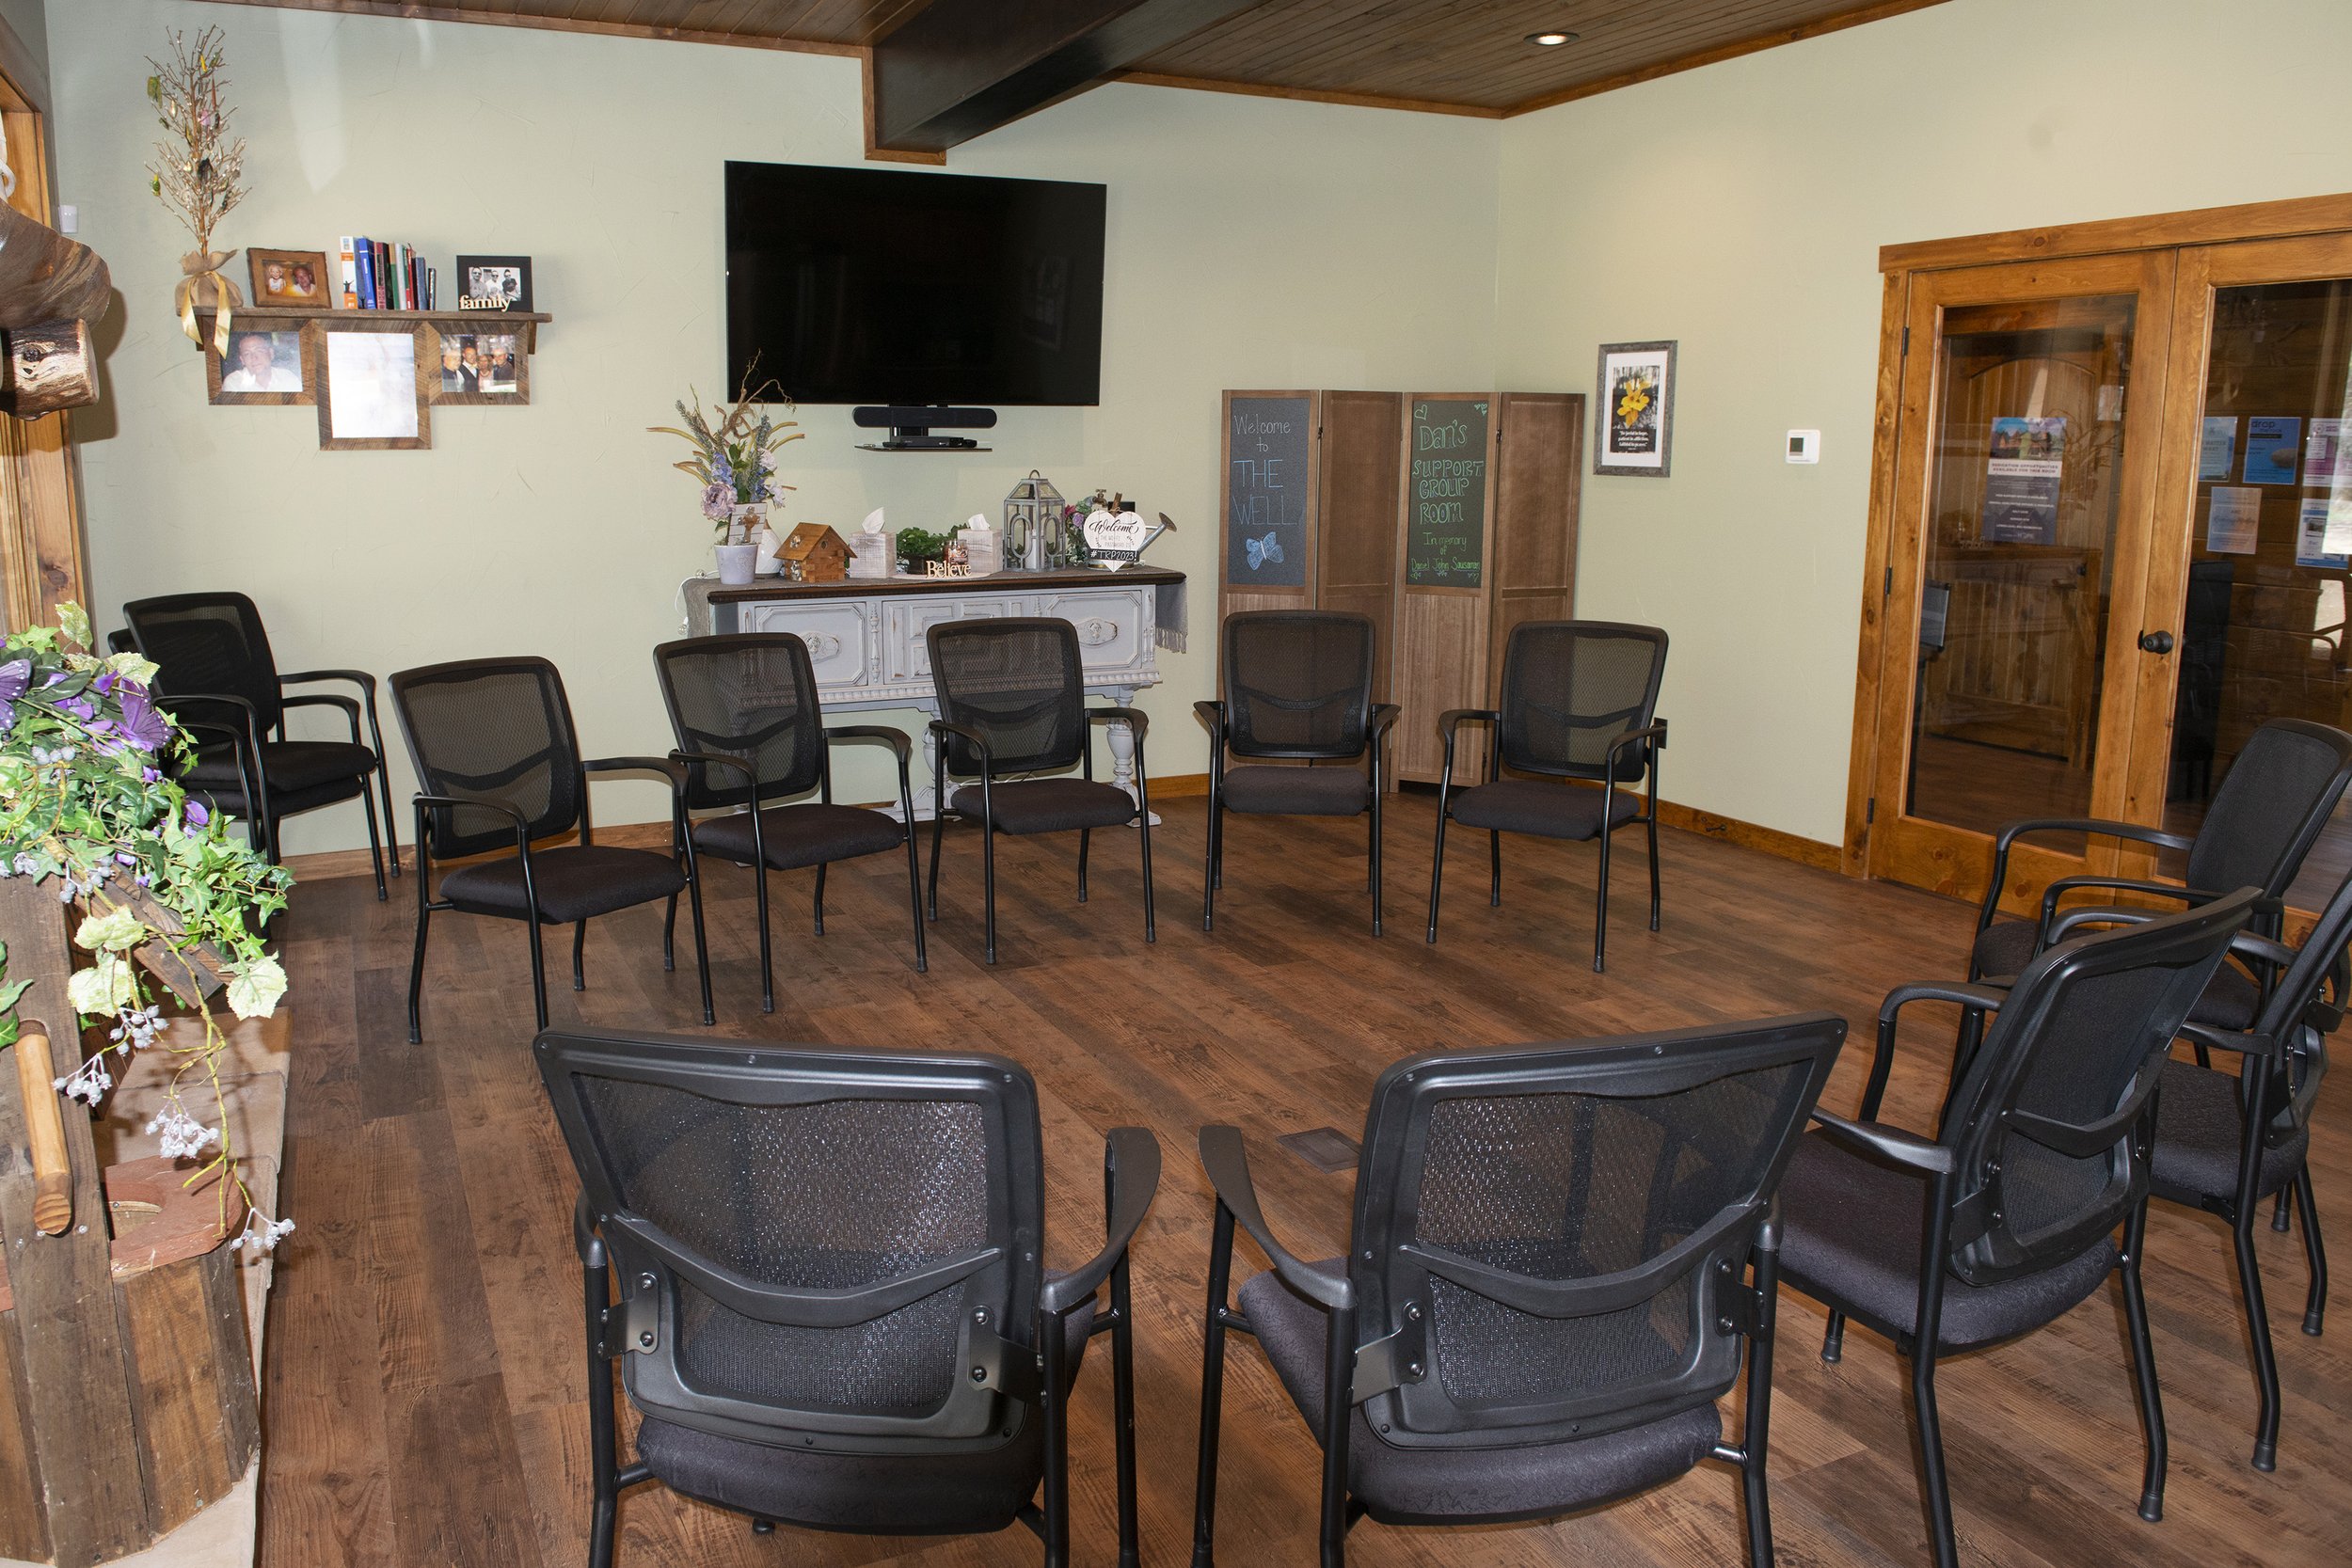 Support Group Room